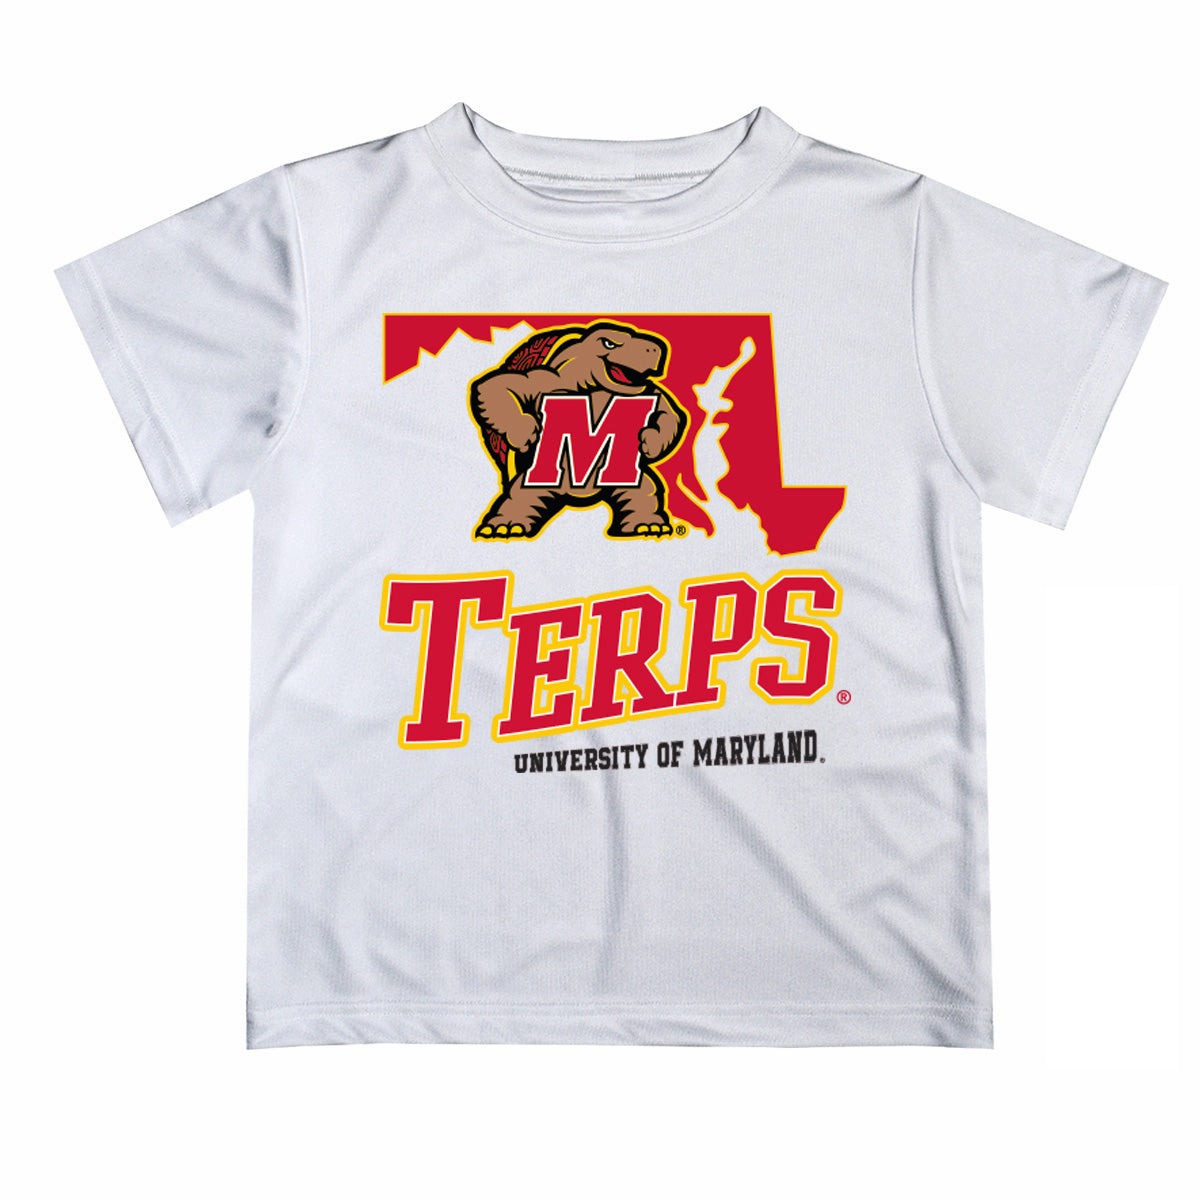 Maryland Terrapins Vive La Fete State Map Heather Gray Short Sleeve Tee Shirt